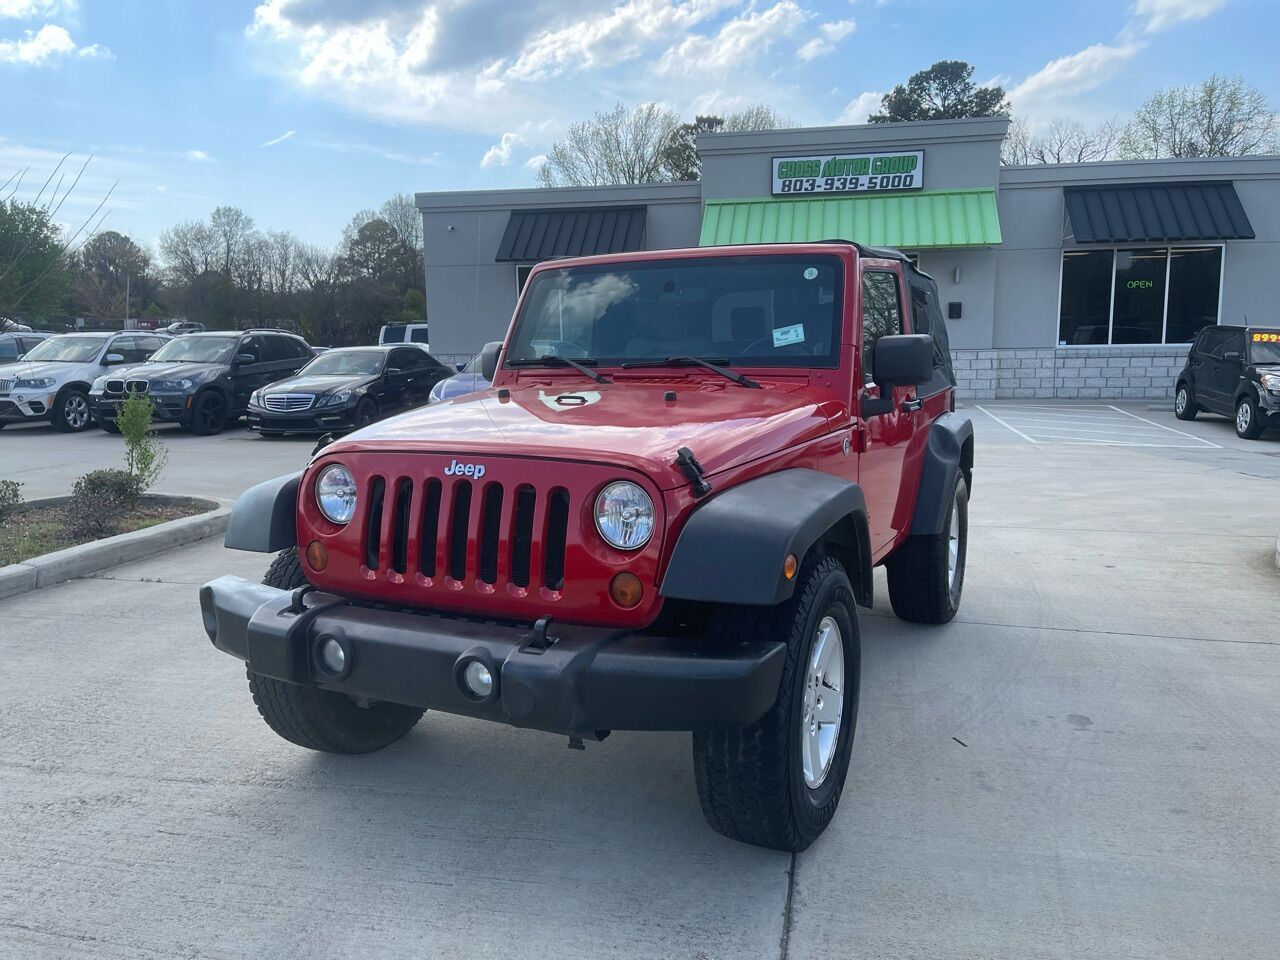 2008 Jeep Wrangler For Sale In Shelby, NC ®